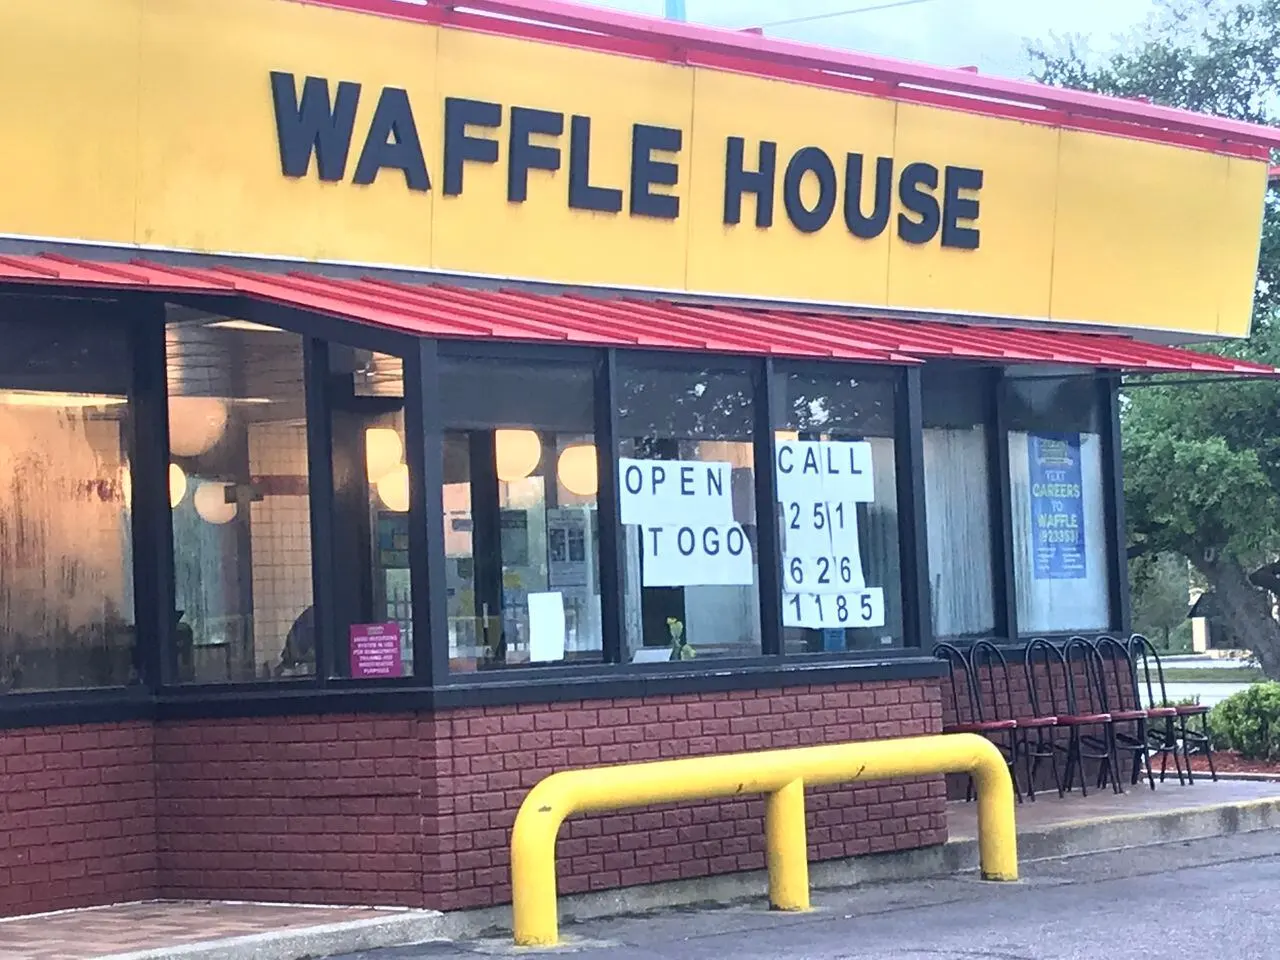 Waffle House Staff Claims That The Customer Wanted A Refund As The Hashbrowns Were Cooked In Oil